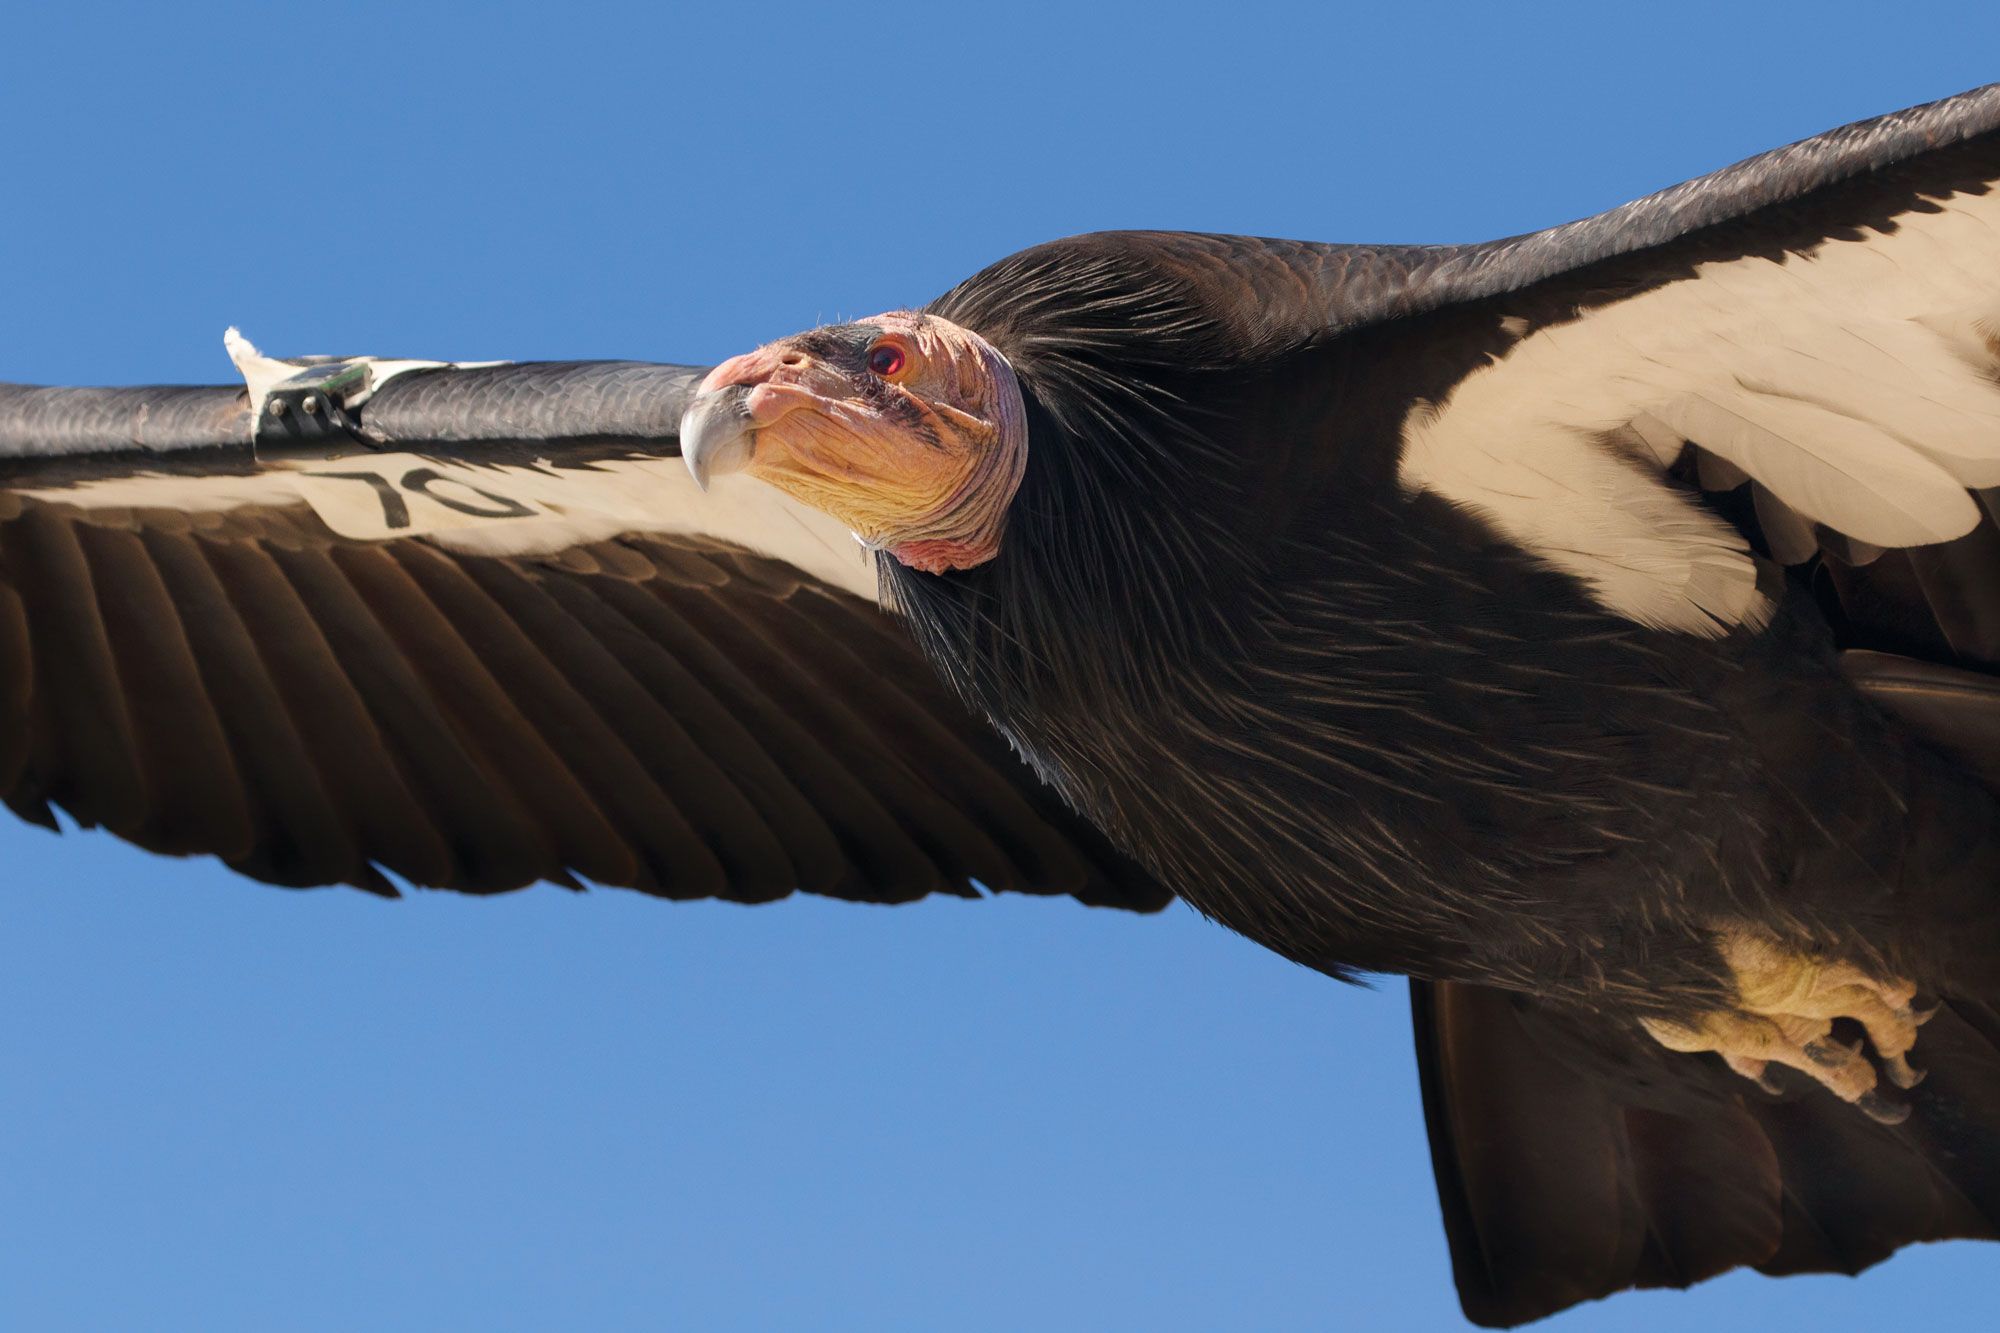 Condor Free Wallpaper download - Download Free Condor HD Wallpapers to your  mobile phone or tablet